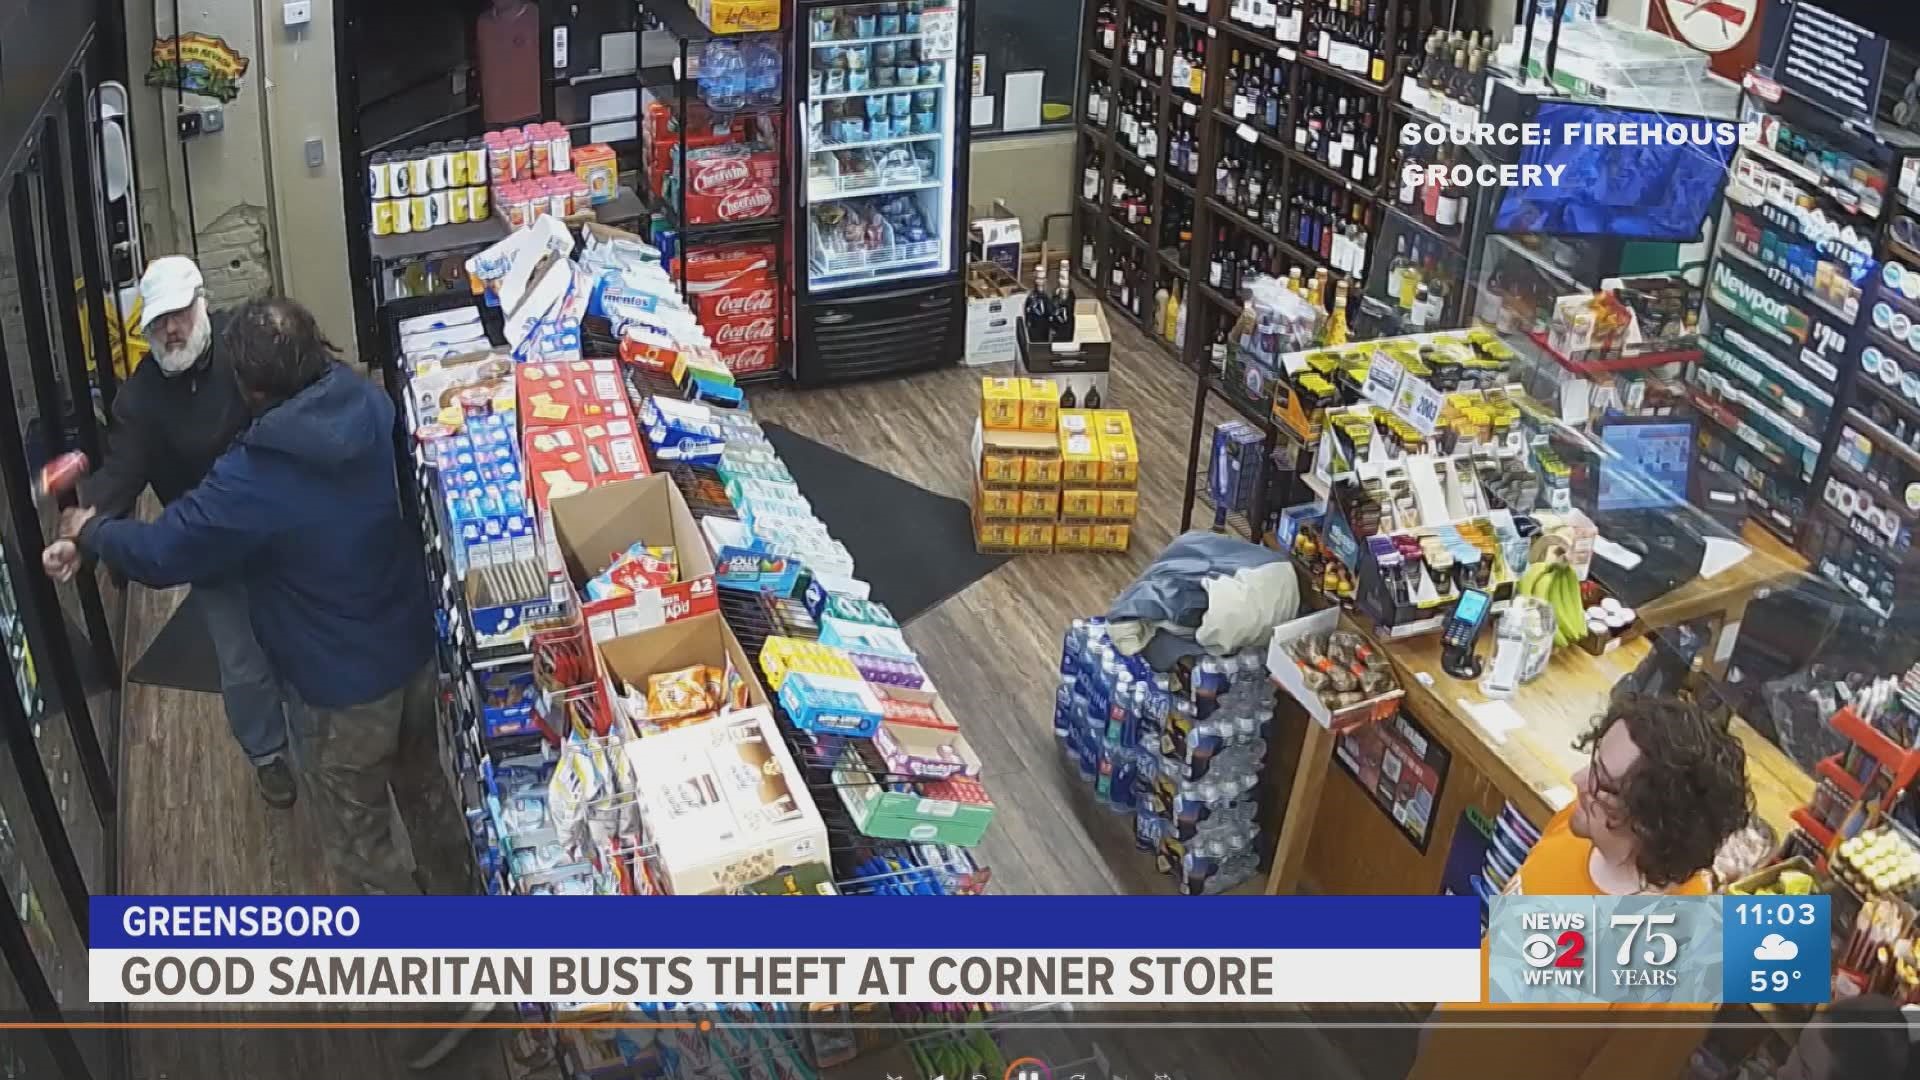 Someone tried to steal from Firehouse Grocery, and things got violent.